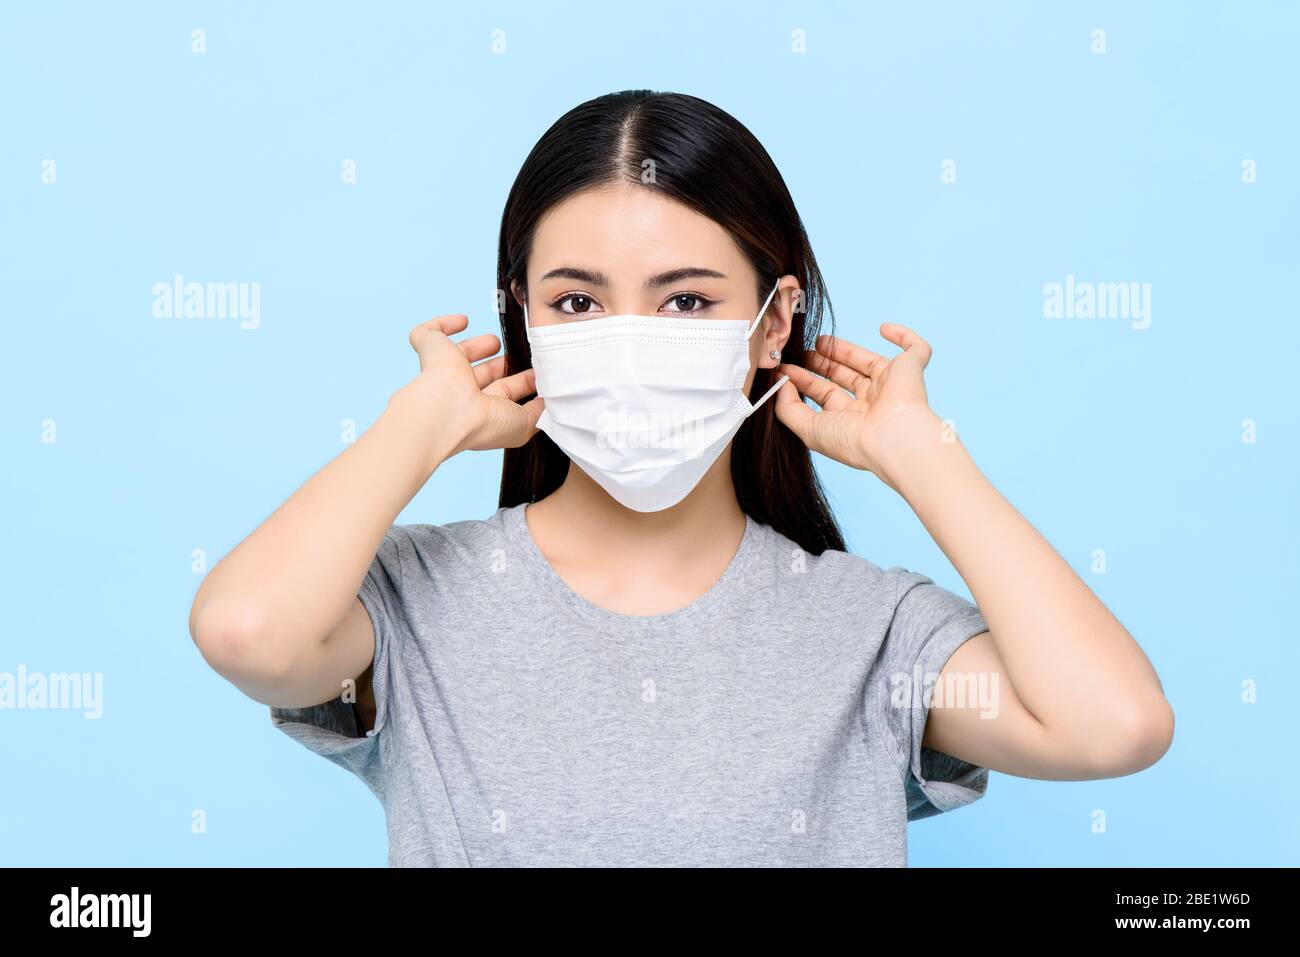 Asian woman wearing medical face mask isolated on light blue background Stock Photo